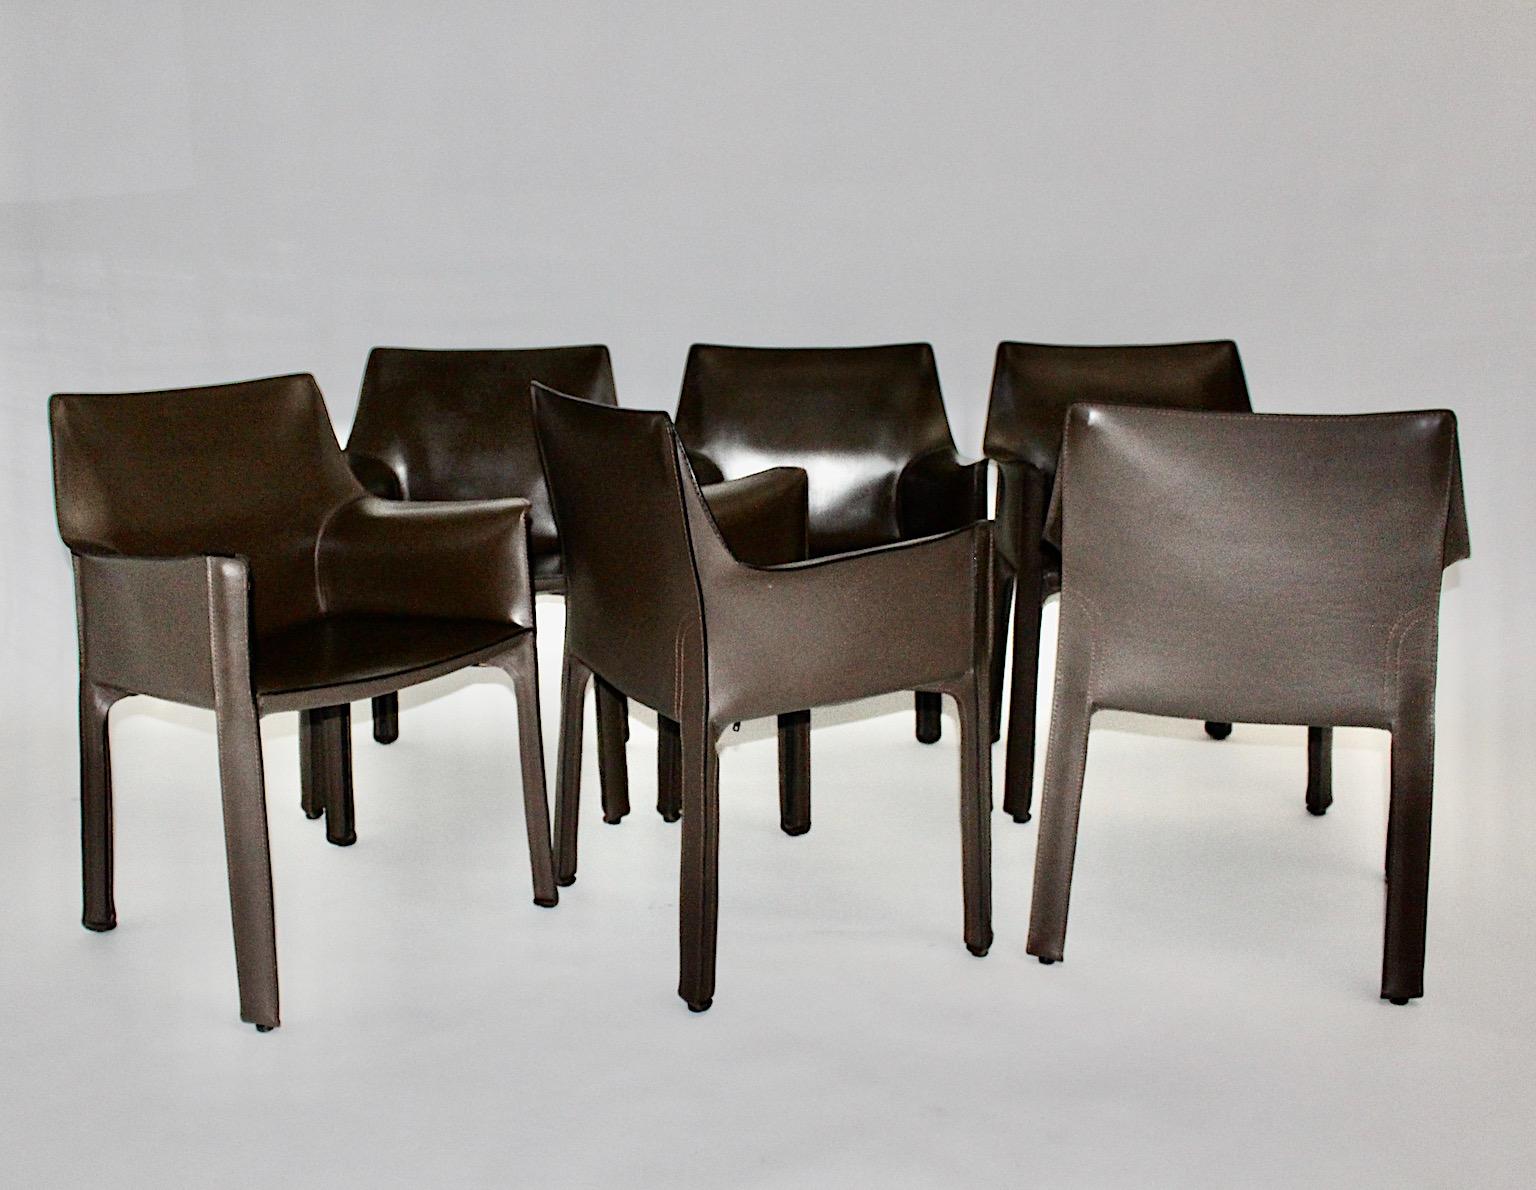 Modern Mario Bellini Vintage Chocolate Brown Leather Dining Chairs Cassina 1970s Italy For Sale